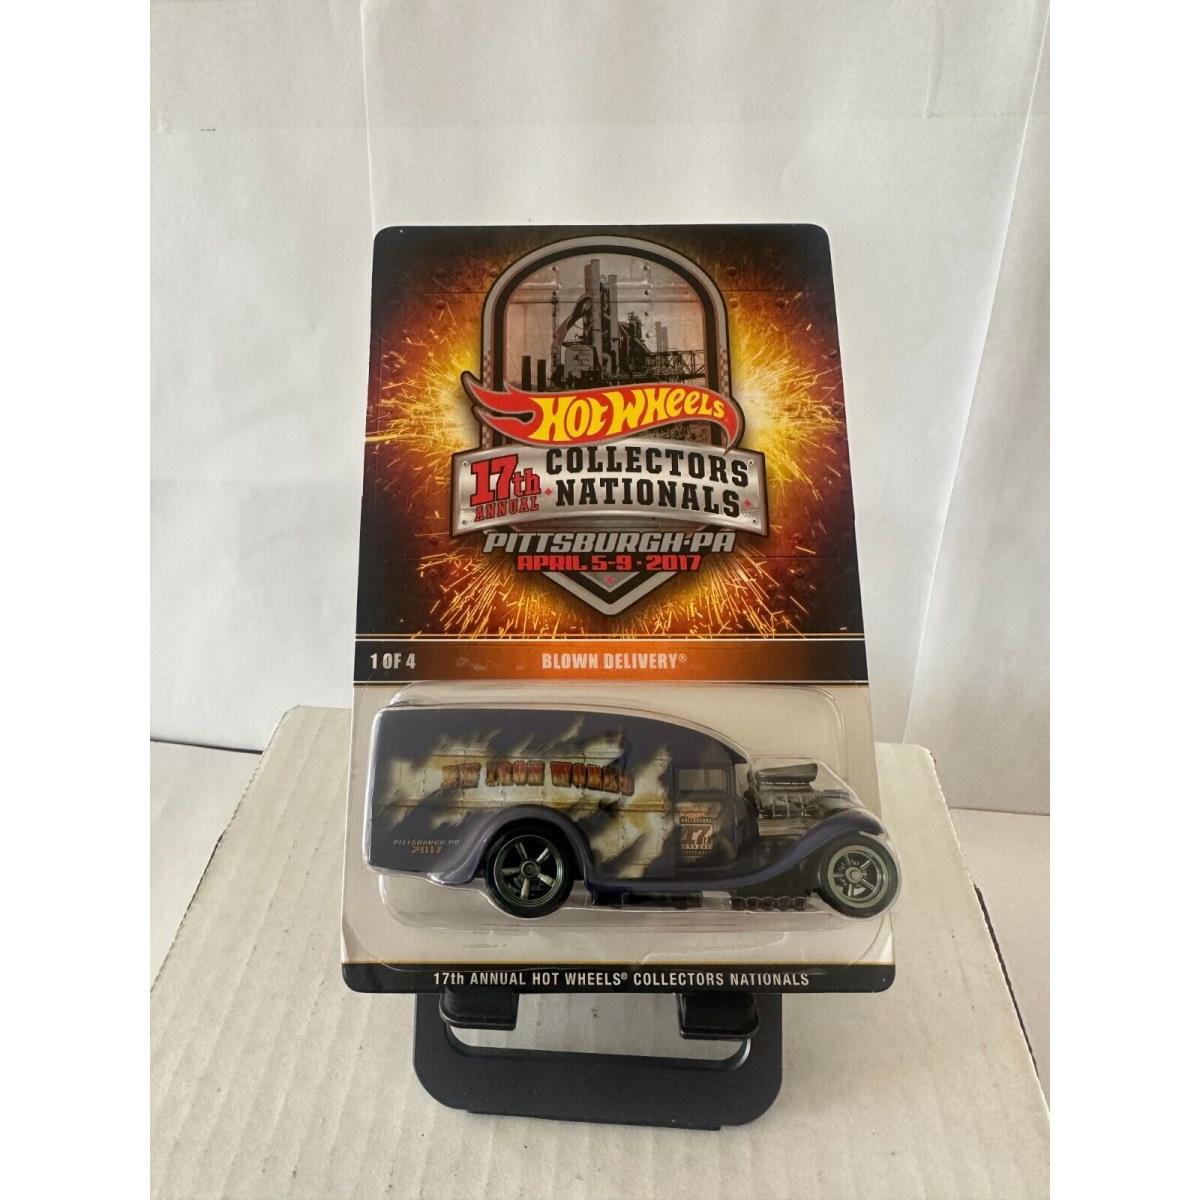 Hot Wheels 17th Annual Collectors Nationals Blown Delivery 1/4 V17